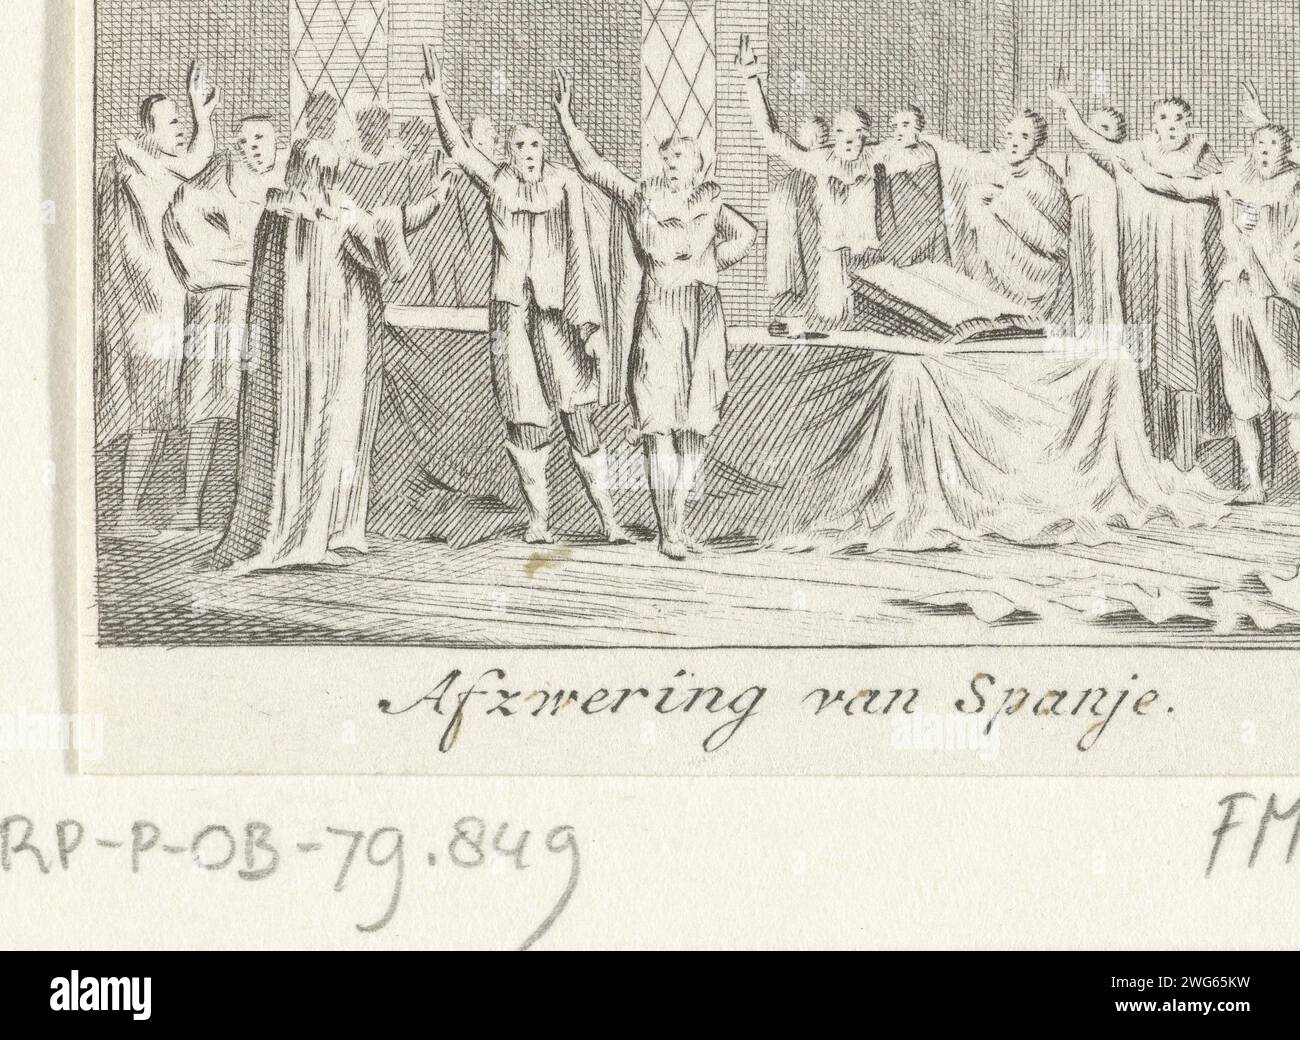 The renouncement of Philip II by the States, 1581, 1700 - 1799 print Small representation of renouncing the Spanish king Philip II by the States, July 26, 1581. Interior in which a large group of members of the States General take the oath. Netherlands paper engraving swearing an oath (with two fingers raised). involuntary abdication (of a ruler) Stock Photo